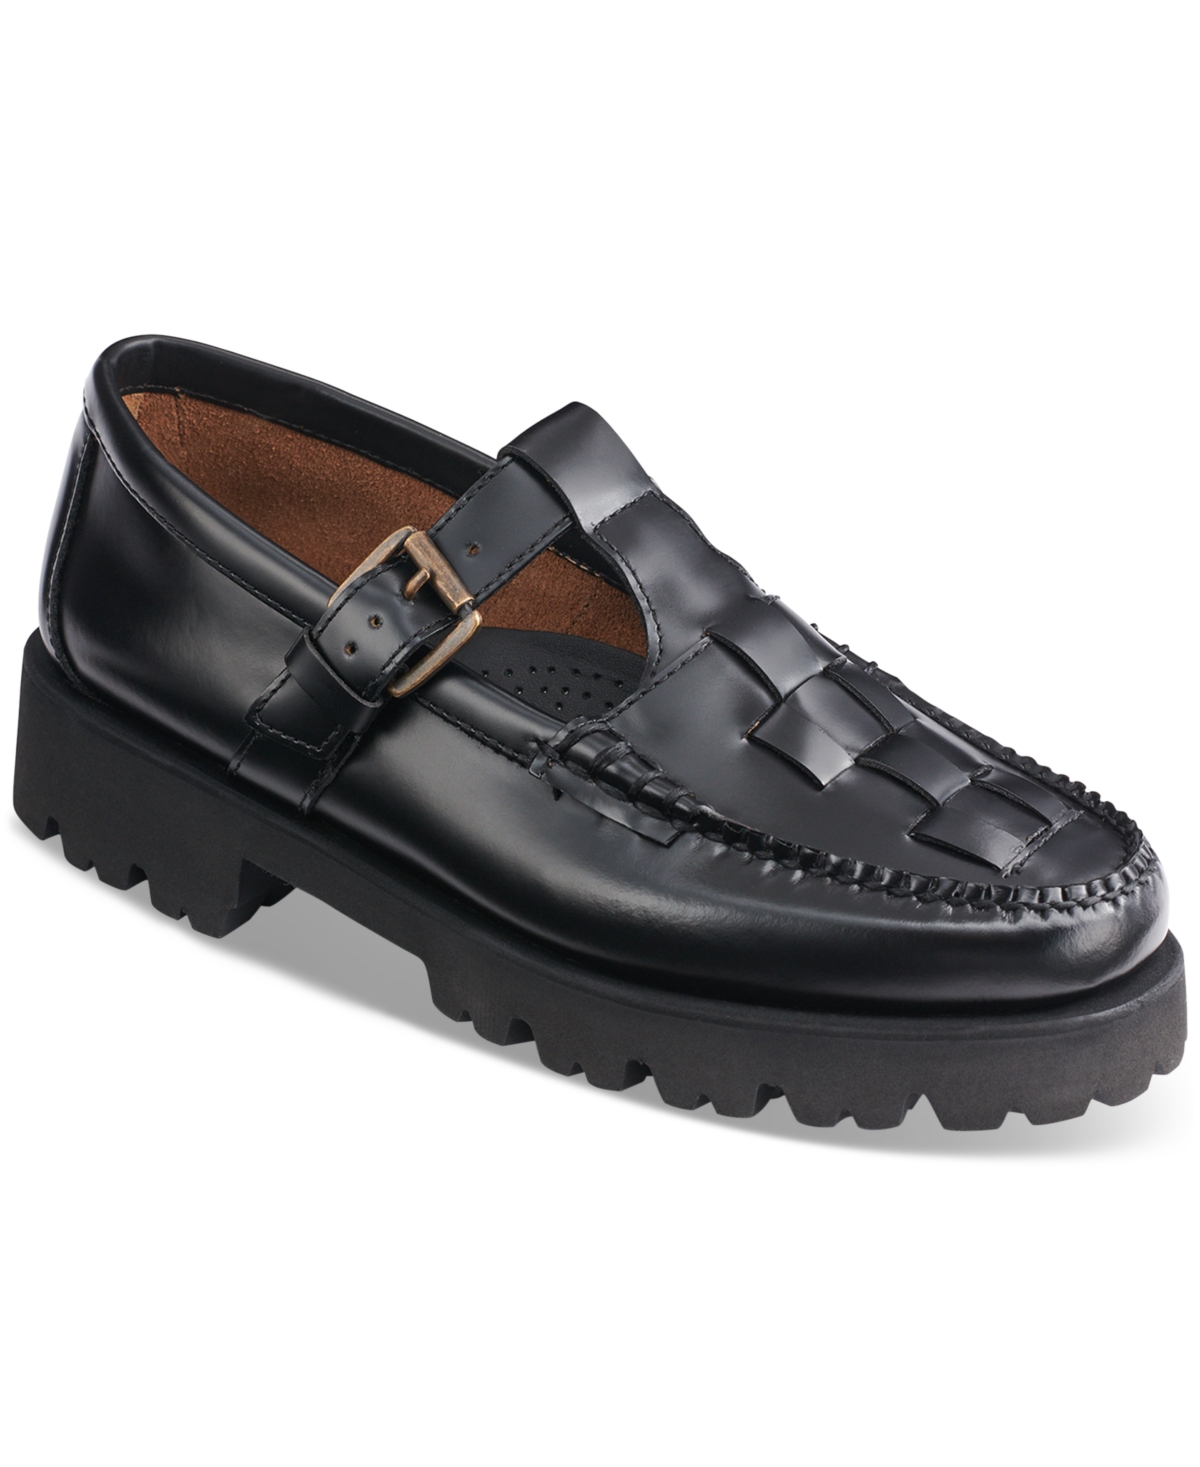 Gh Bass G.h.bass Women's Fisherman Mary Jane Weejuns Loafer Flats In Black